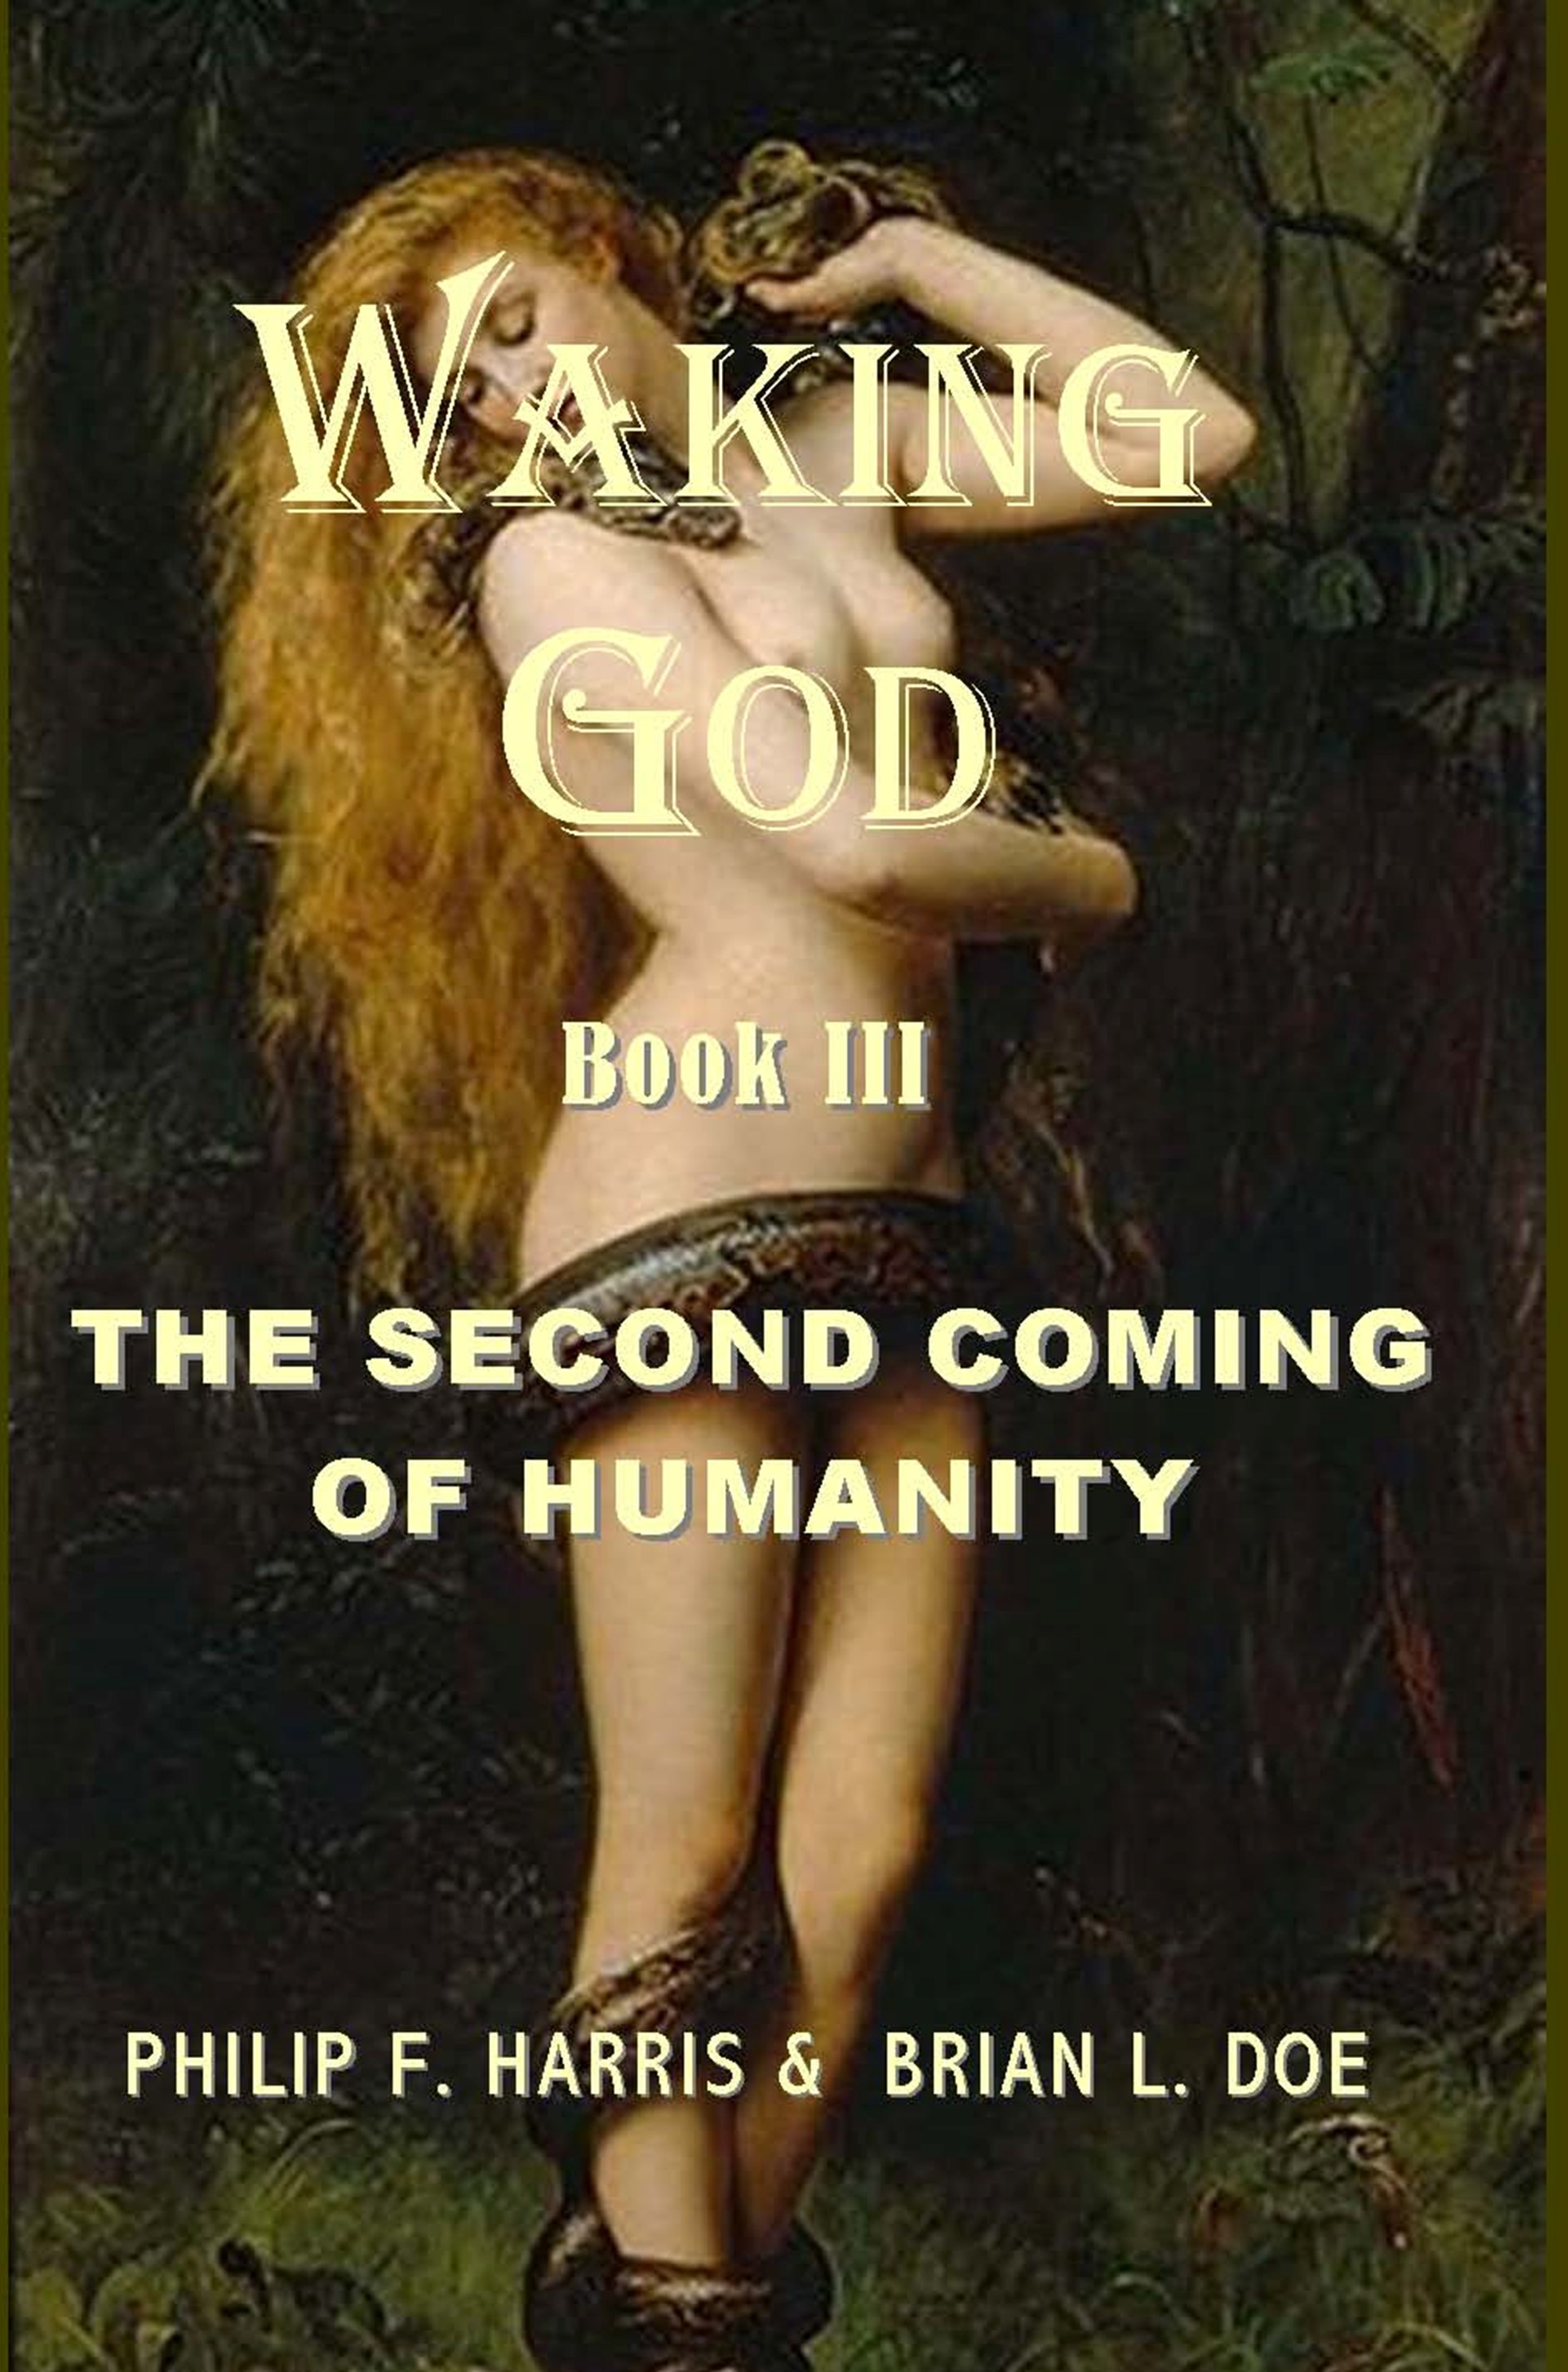 WAKING GOD BOOK III: THE SECOND COMING OF HUMANITY